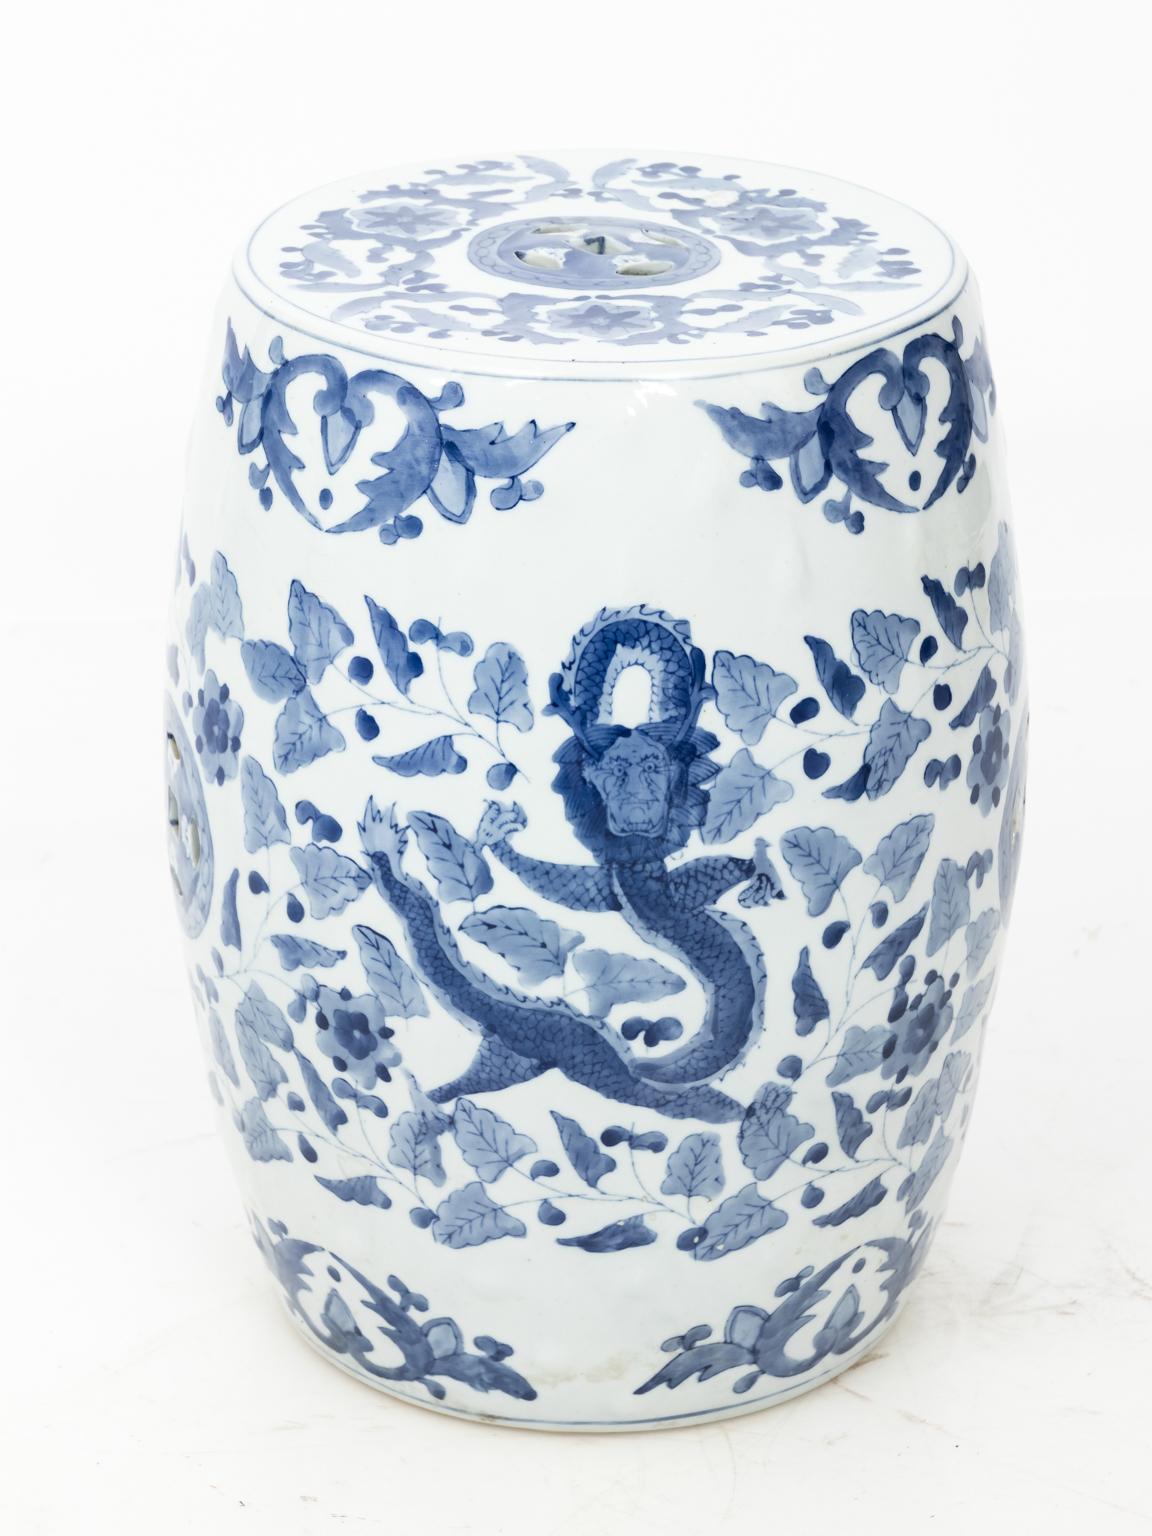 20th Century Blue and White Chinese Porcelain Garden Seat with Phoenix Motif